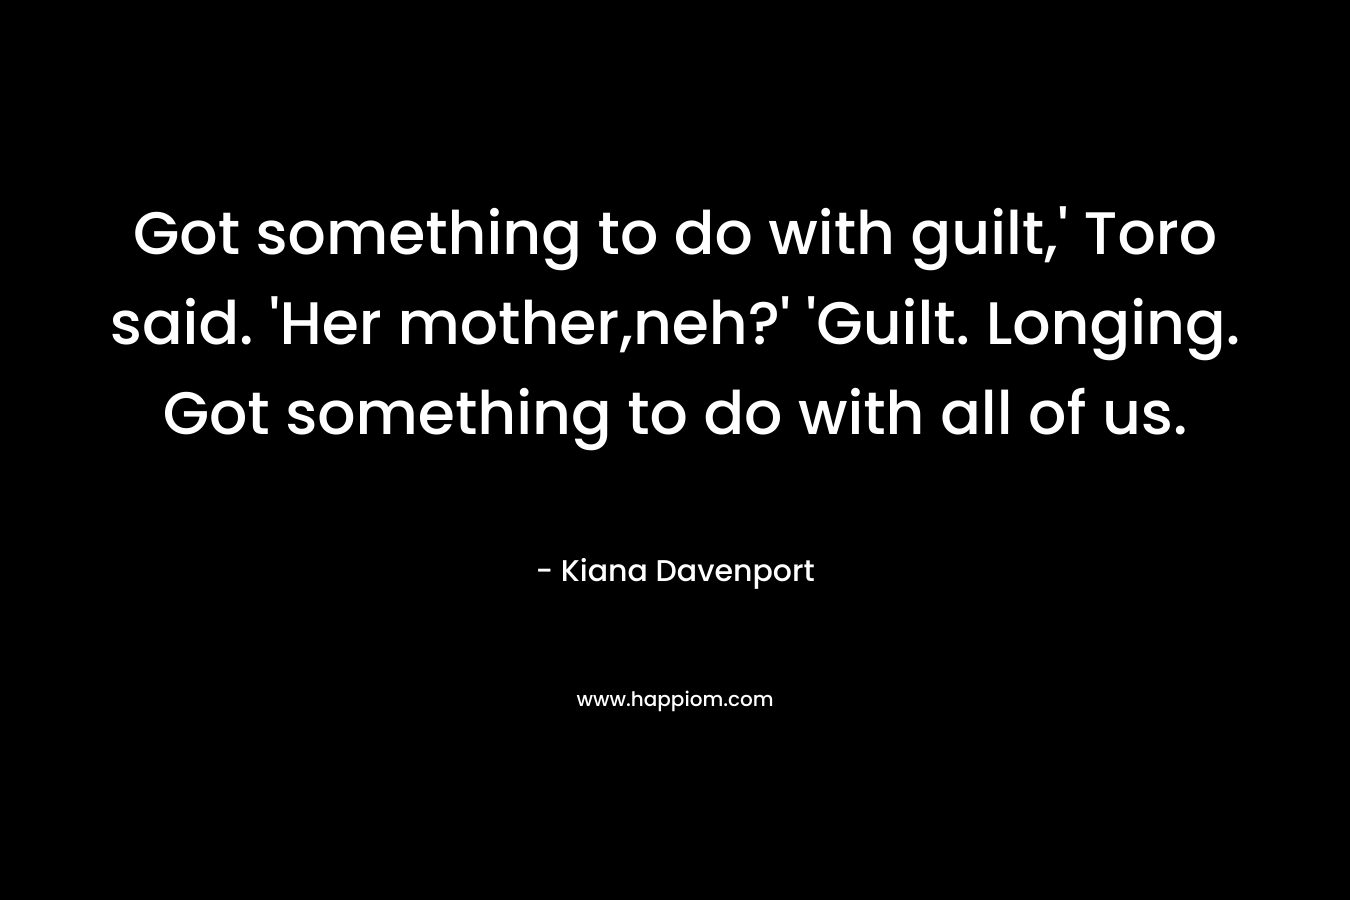 Got something to do with guilt,' Toro said. 'Her mother,neh?' 'Guilt. Longing. Got something to do with all of us.